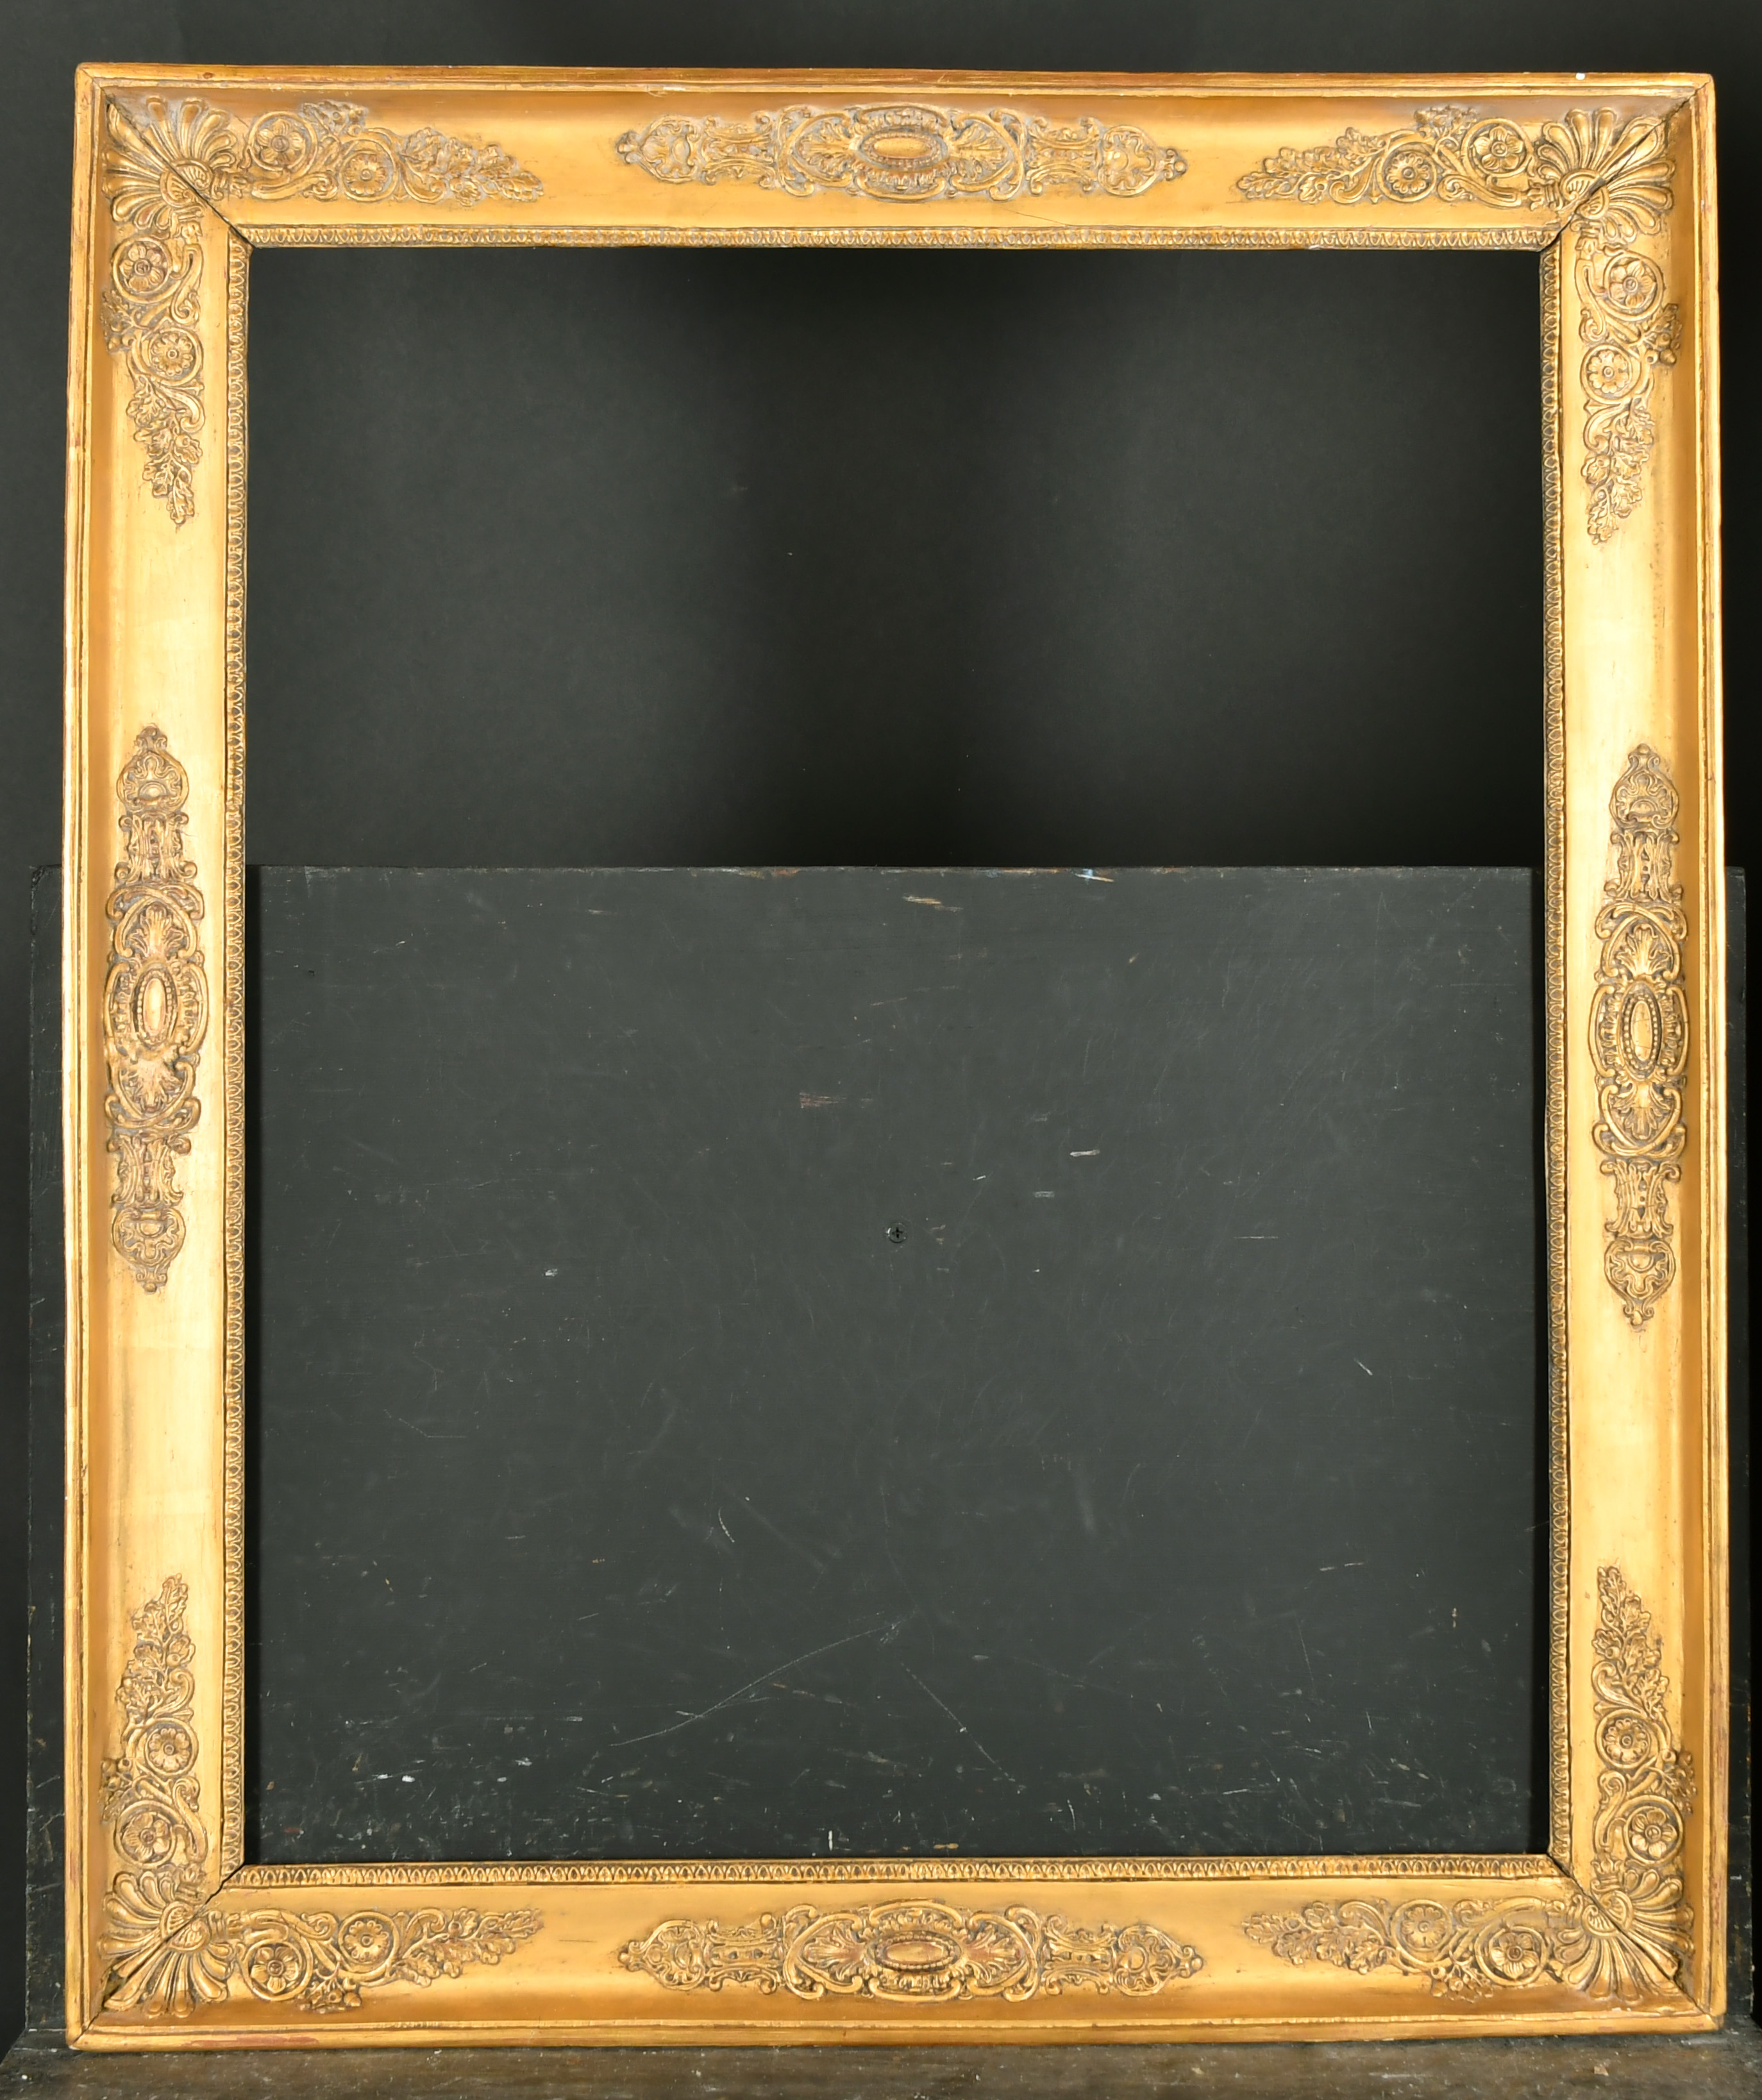 Early 19th Century French School. A Gilt Composition Empire Frame, rebate 27" x 22" (68.6 x 55.9cm) - Image 2 of 3